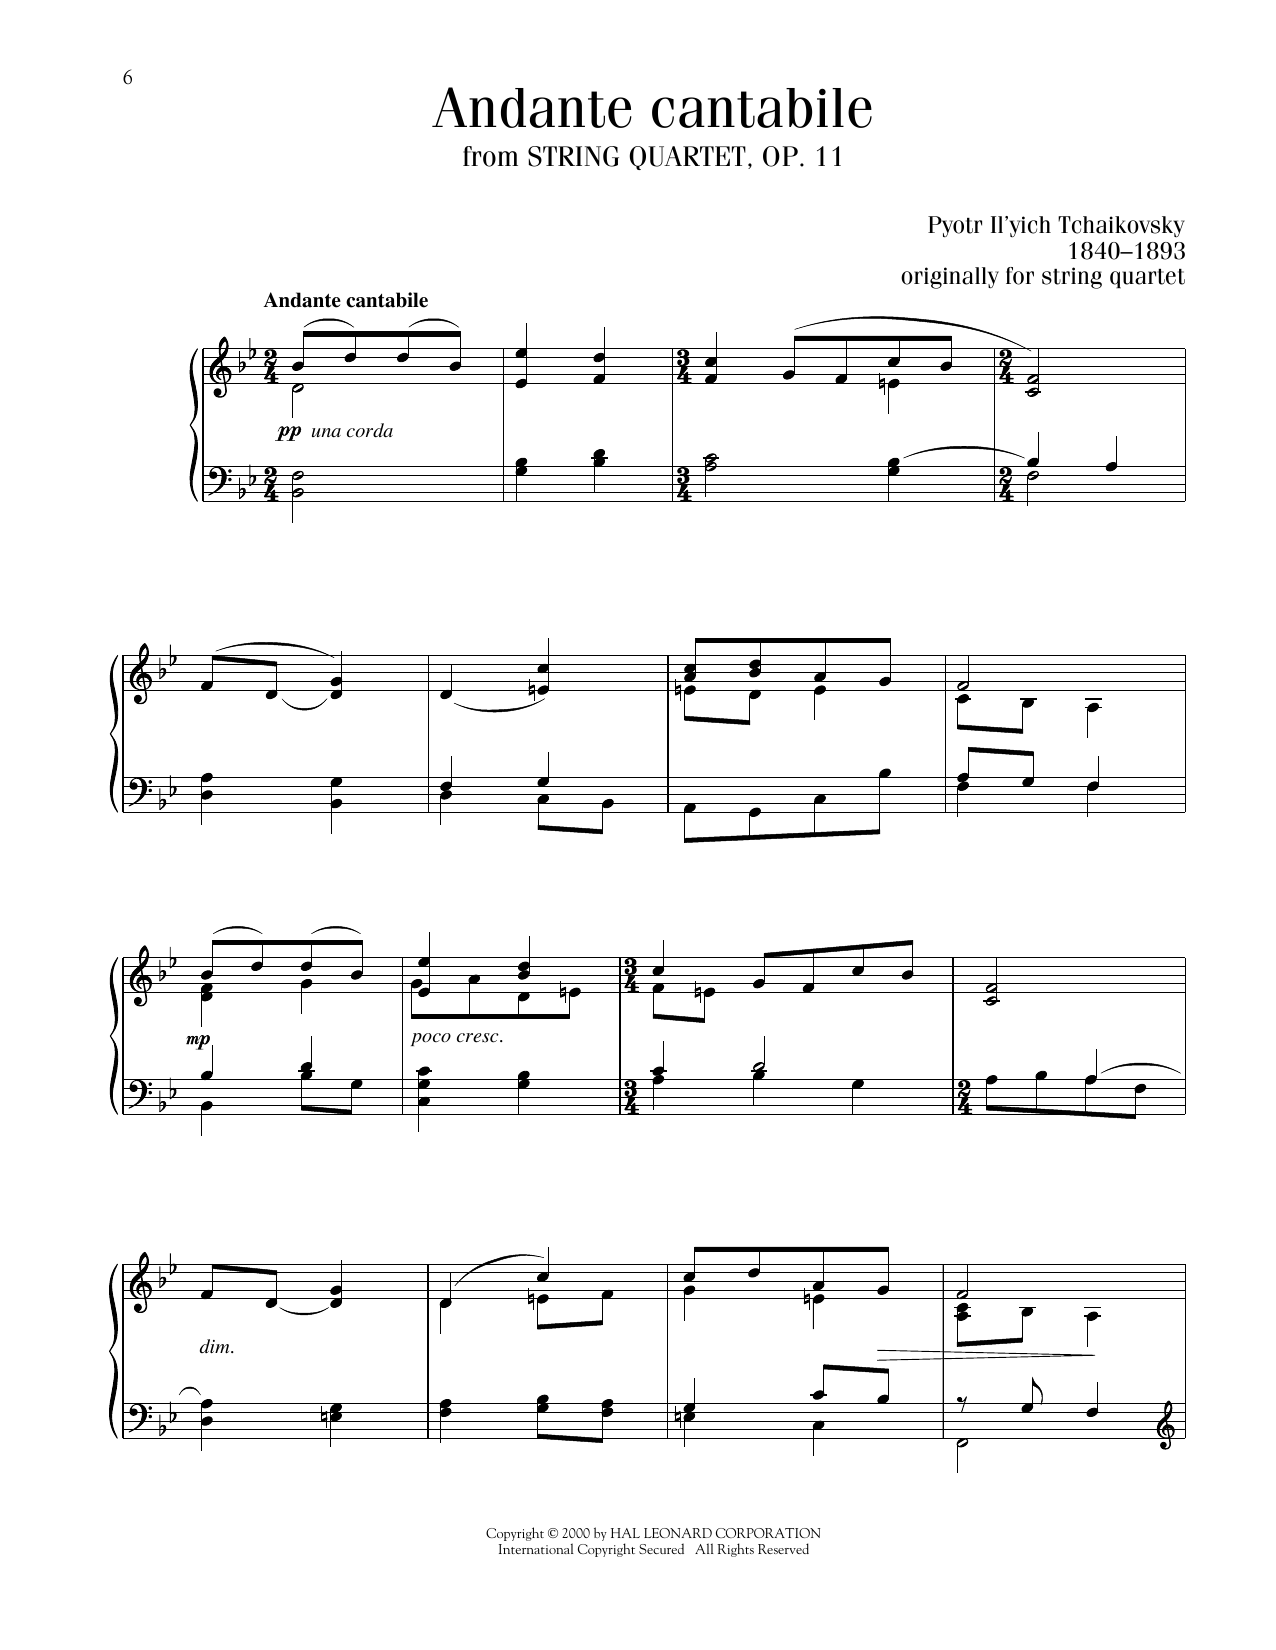 Pyotr Il'yich Tchaikovsky Andante Cantabile sheet music notes printable PDF score